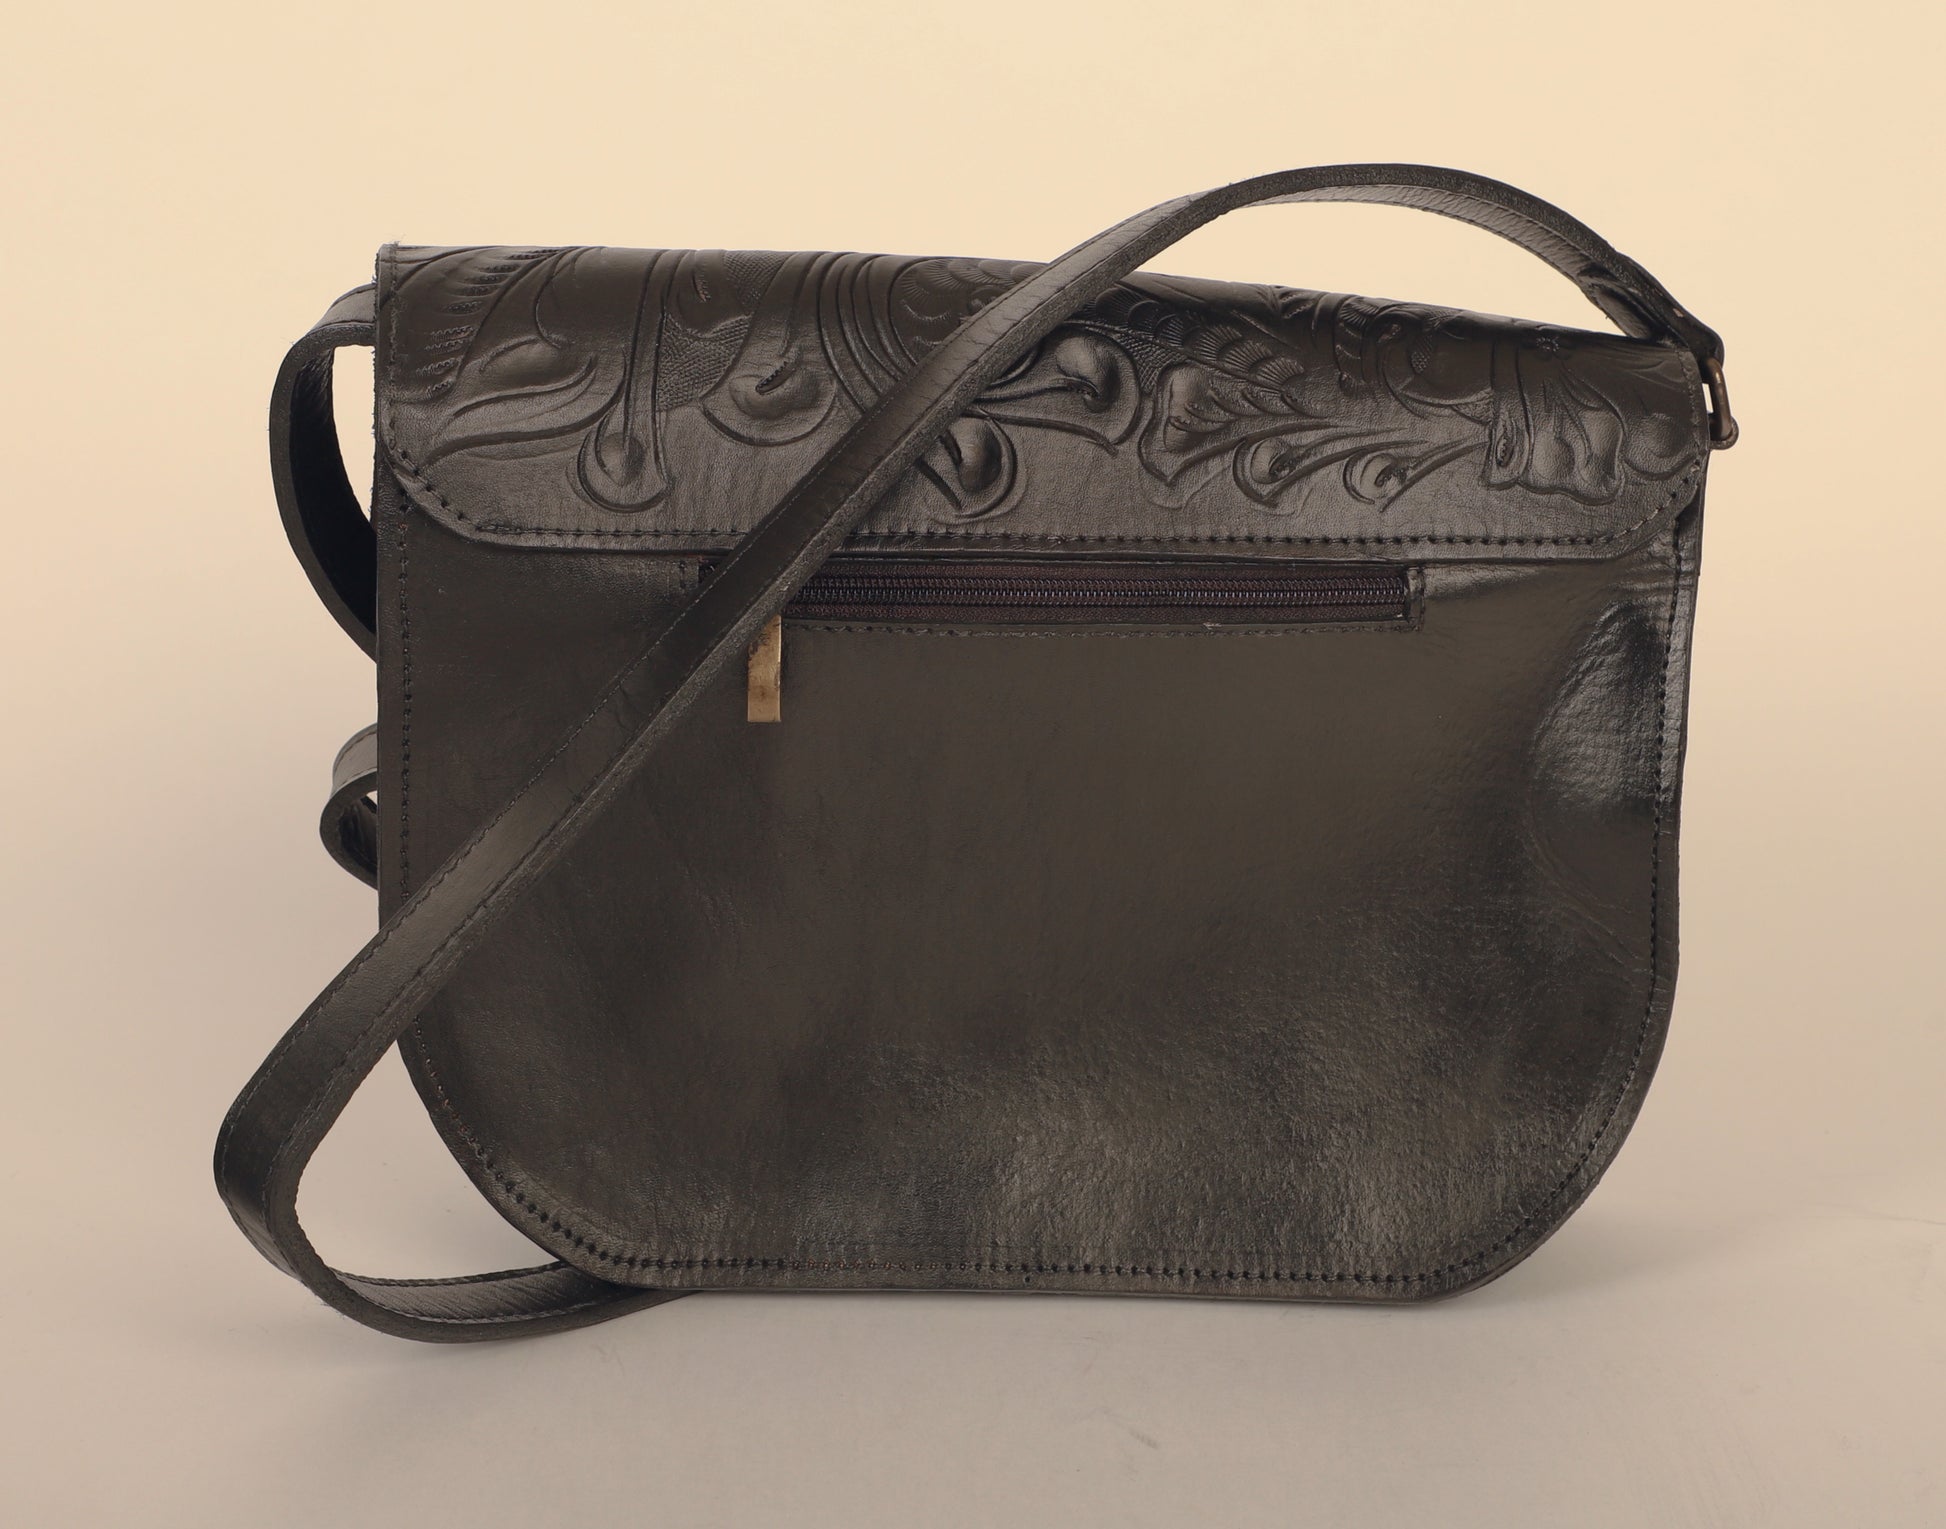 Larger-sized full leather crossbody bag with a rectangular shape and the unmistakenly mexican design on the outer flap. Fully lined with suede. In color black. Back view of the bag with the strap and back pocket. 